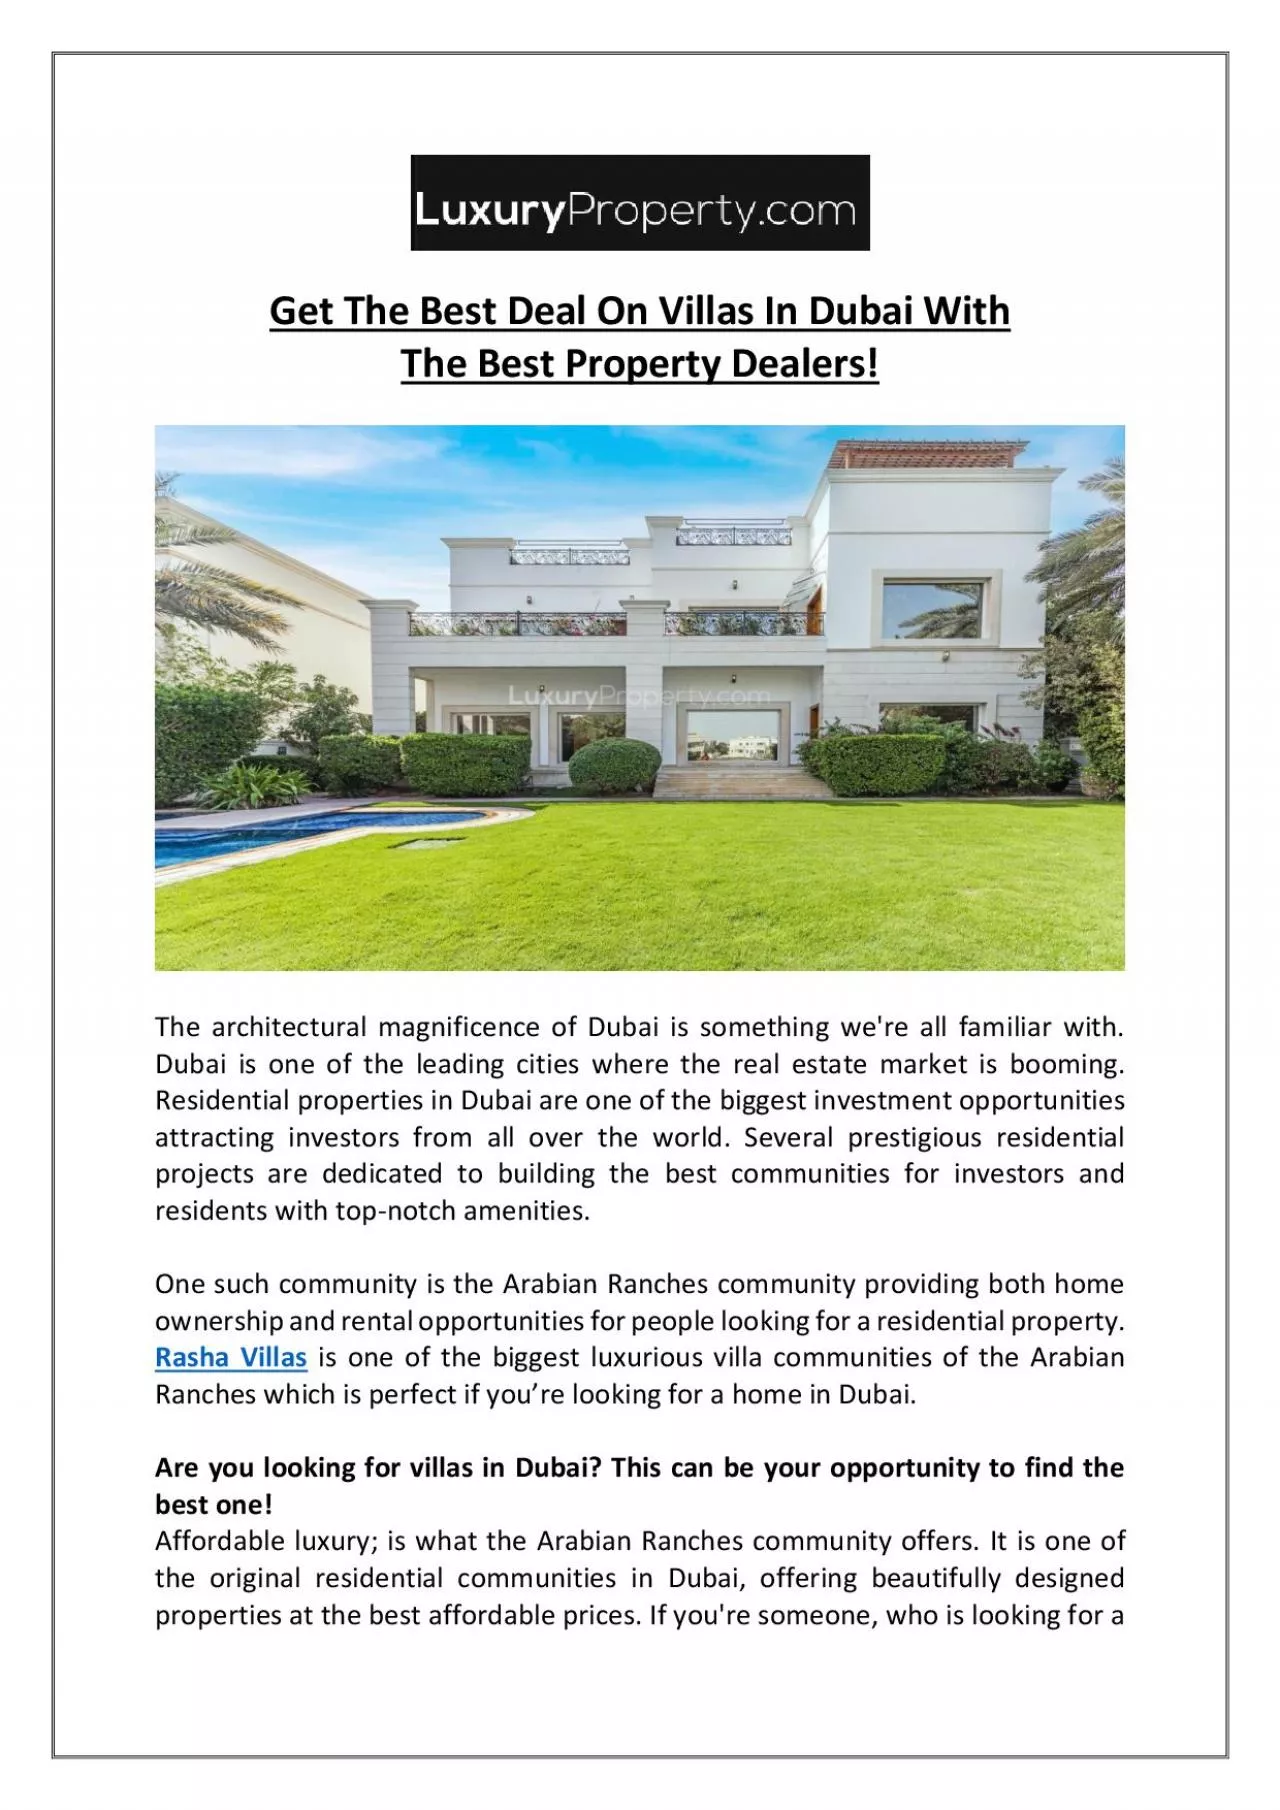 Get The Best Deal On Villas In Dubai With The Best Property Dealers!